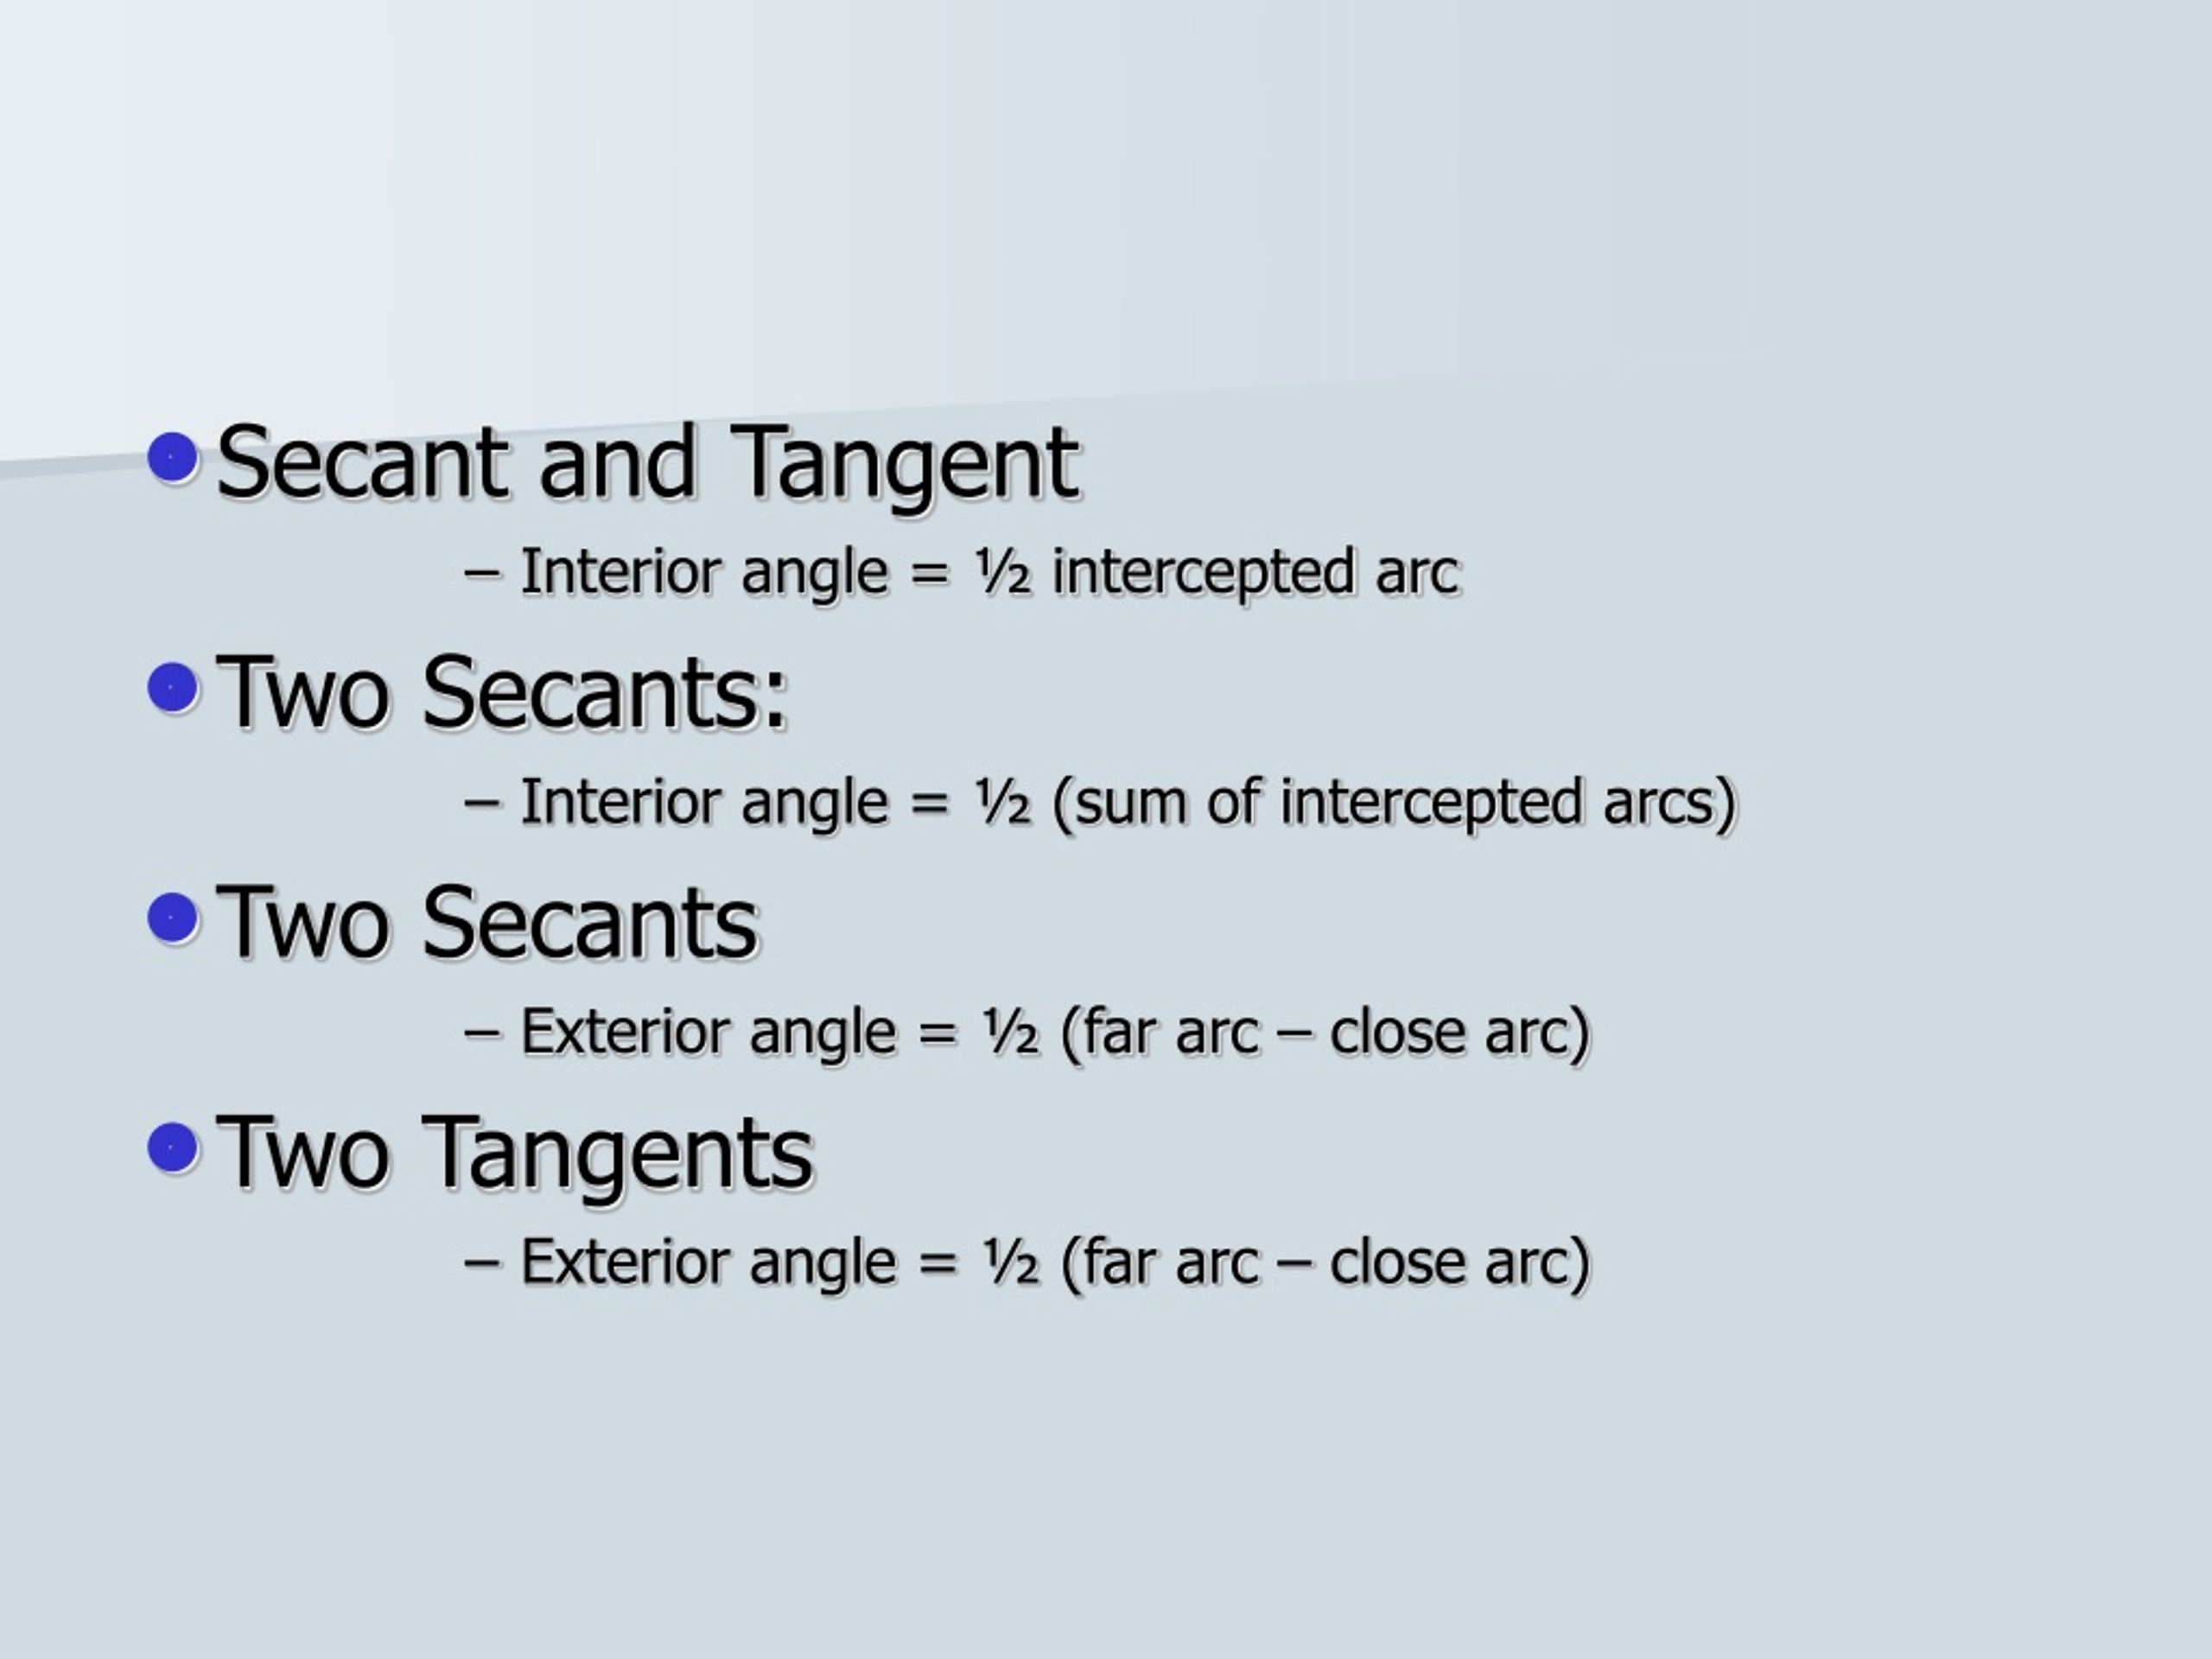 Ppt Lesson 10 6 Secants And Tangents And Angle Measures Powerpoint Presentation Id9105440